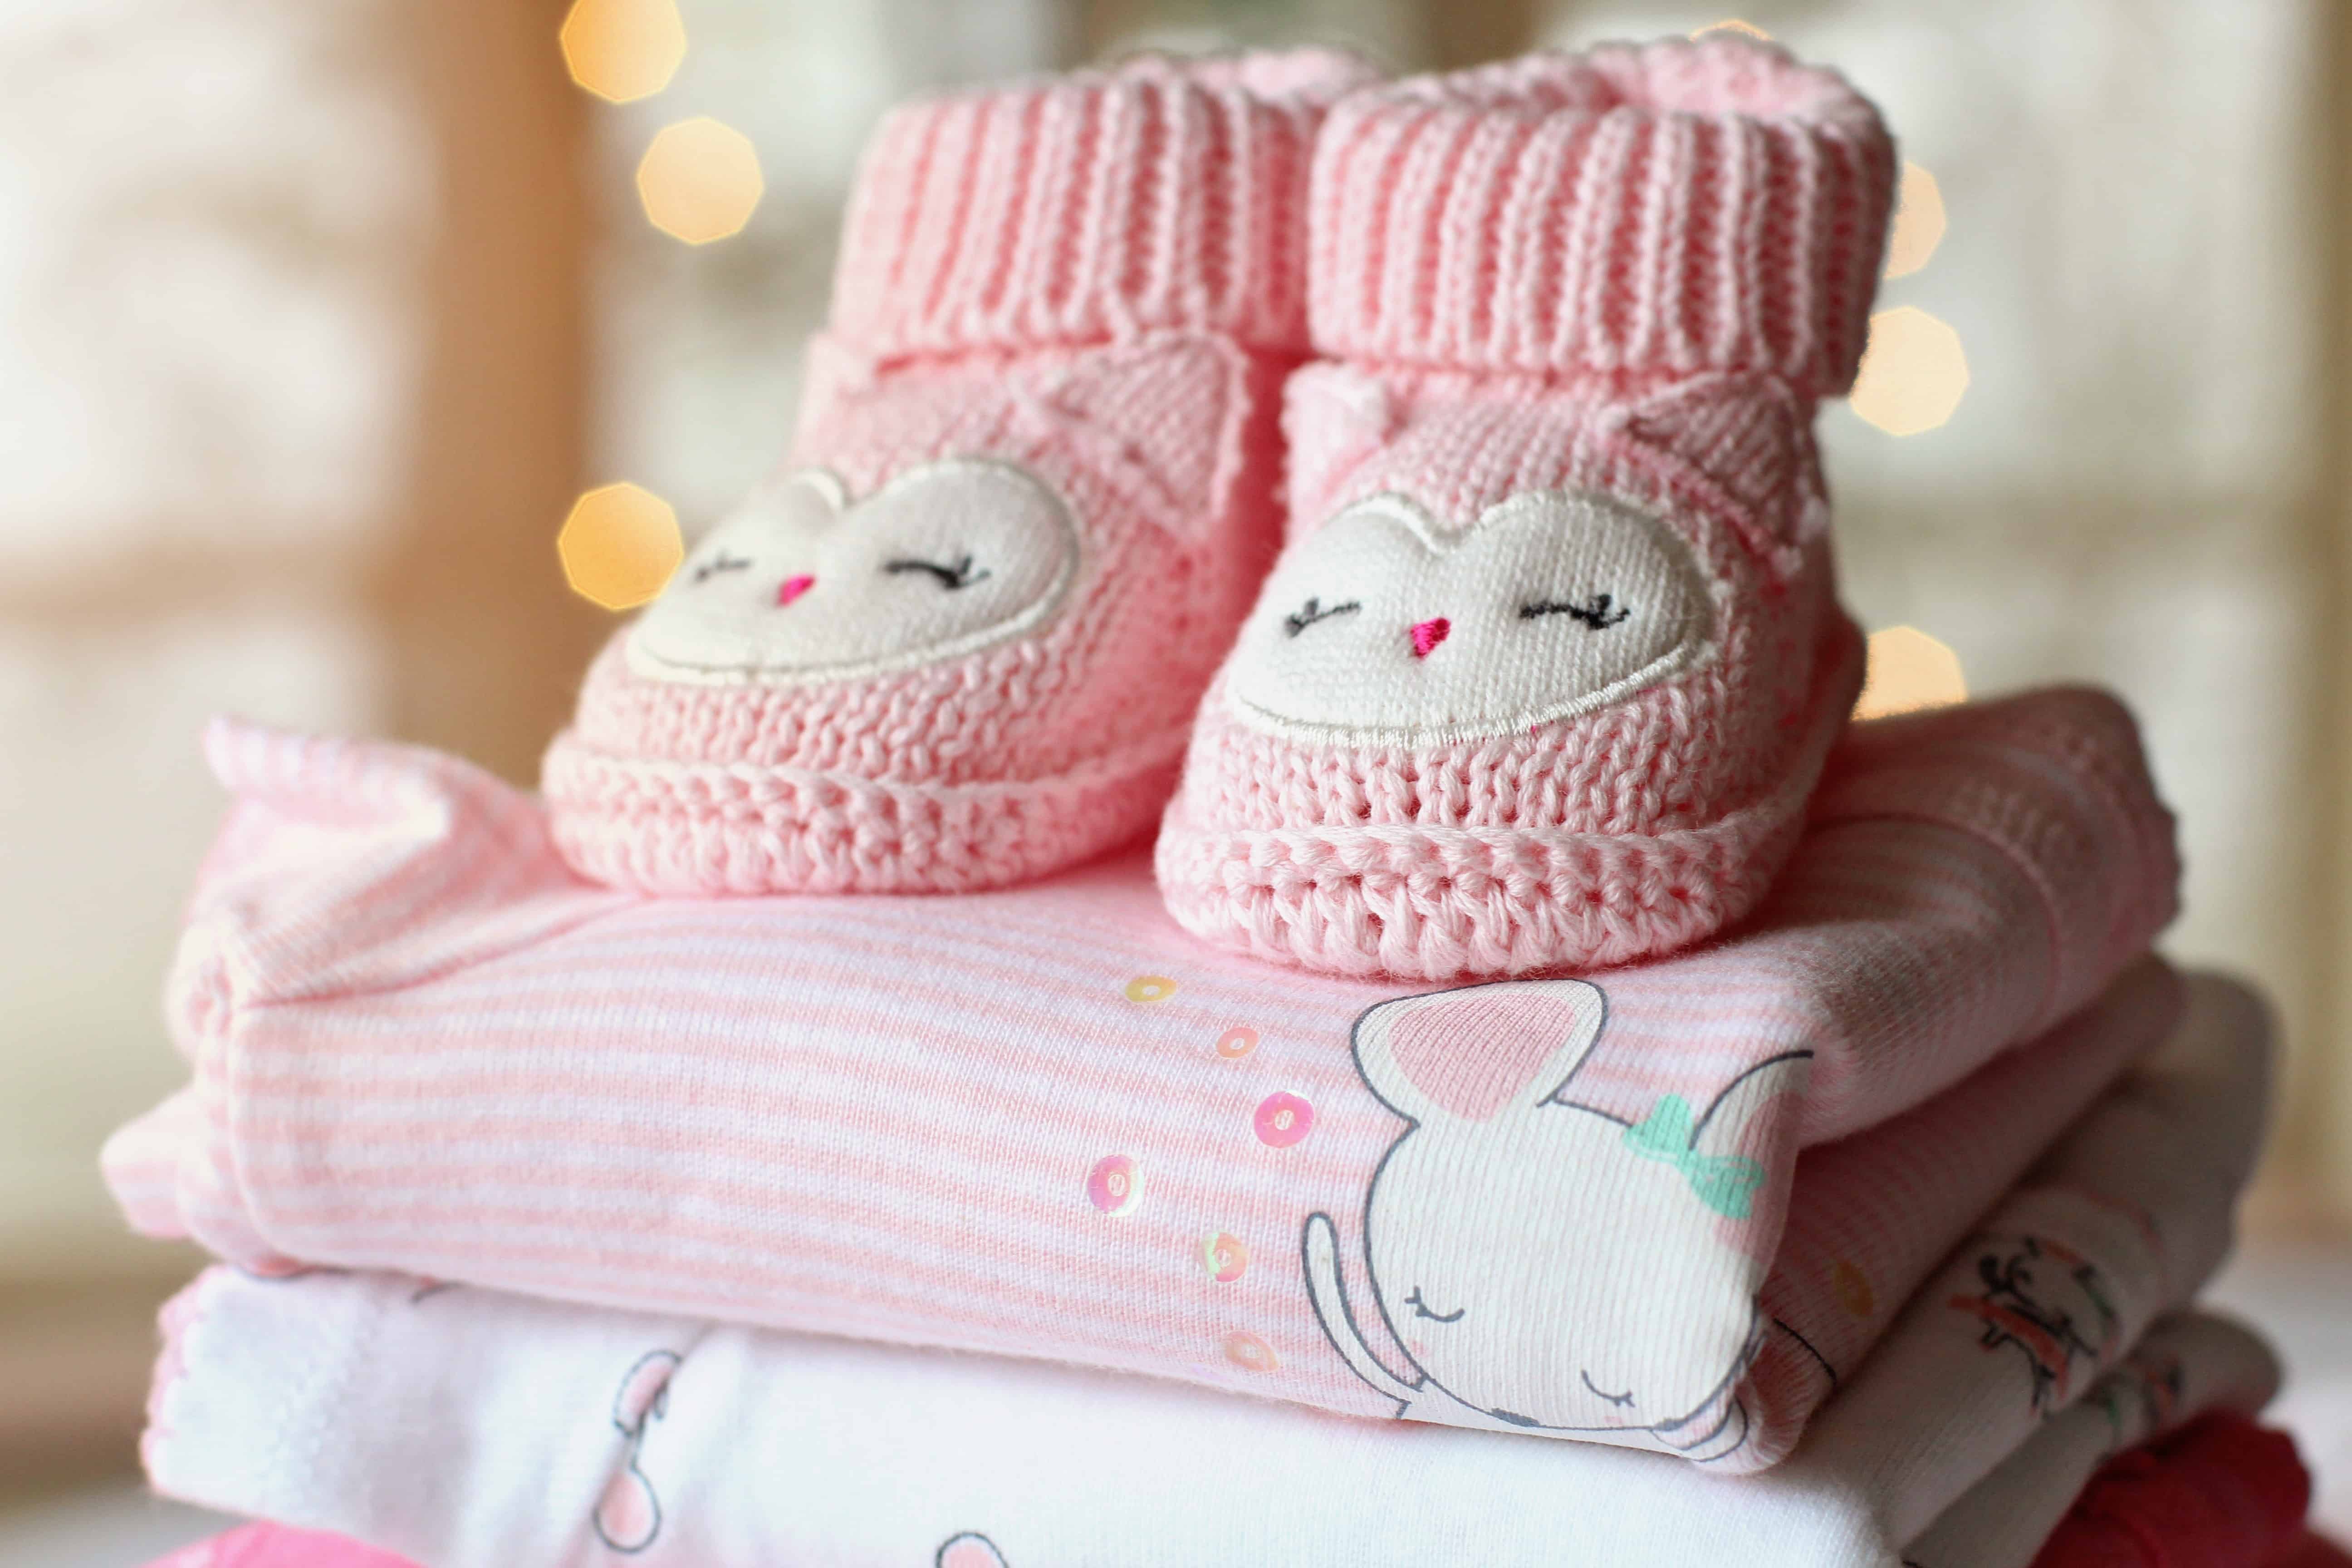 Little pink clothing items for a baby